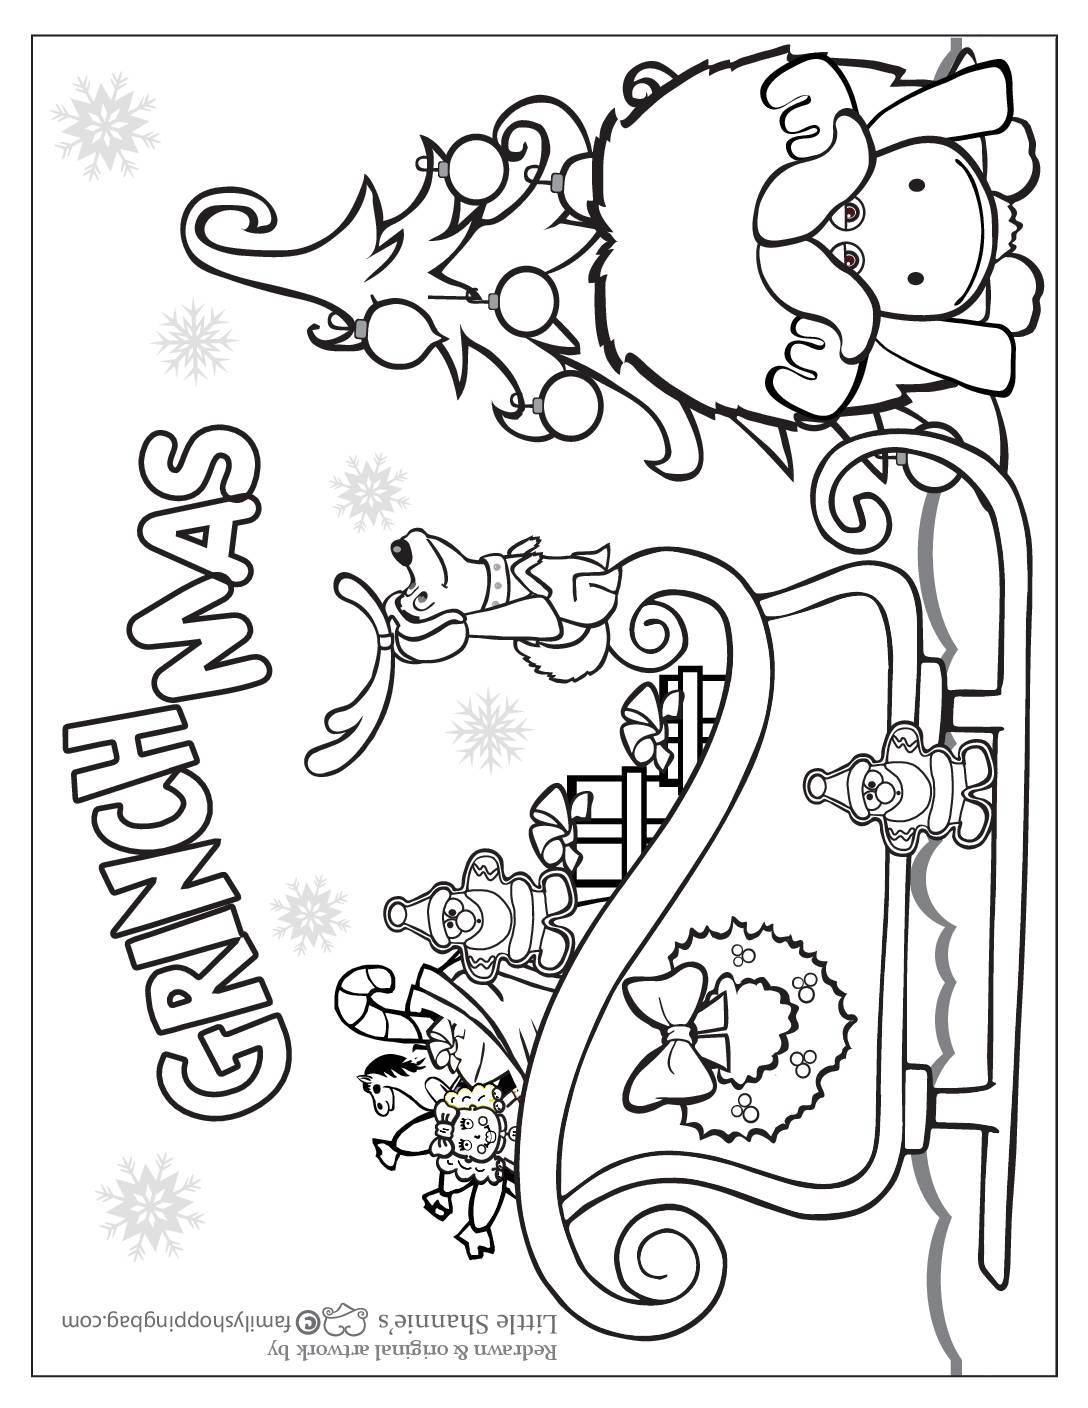 Coloring Page 4 Grinch Coloring Pages